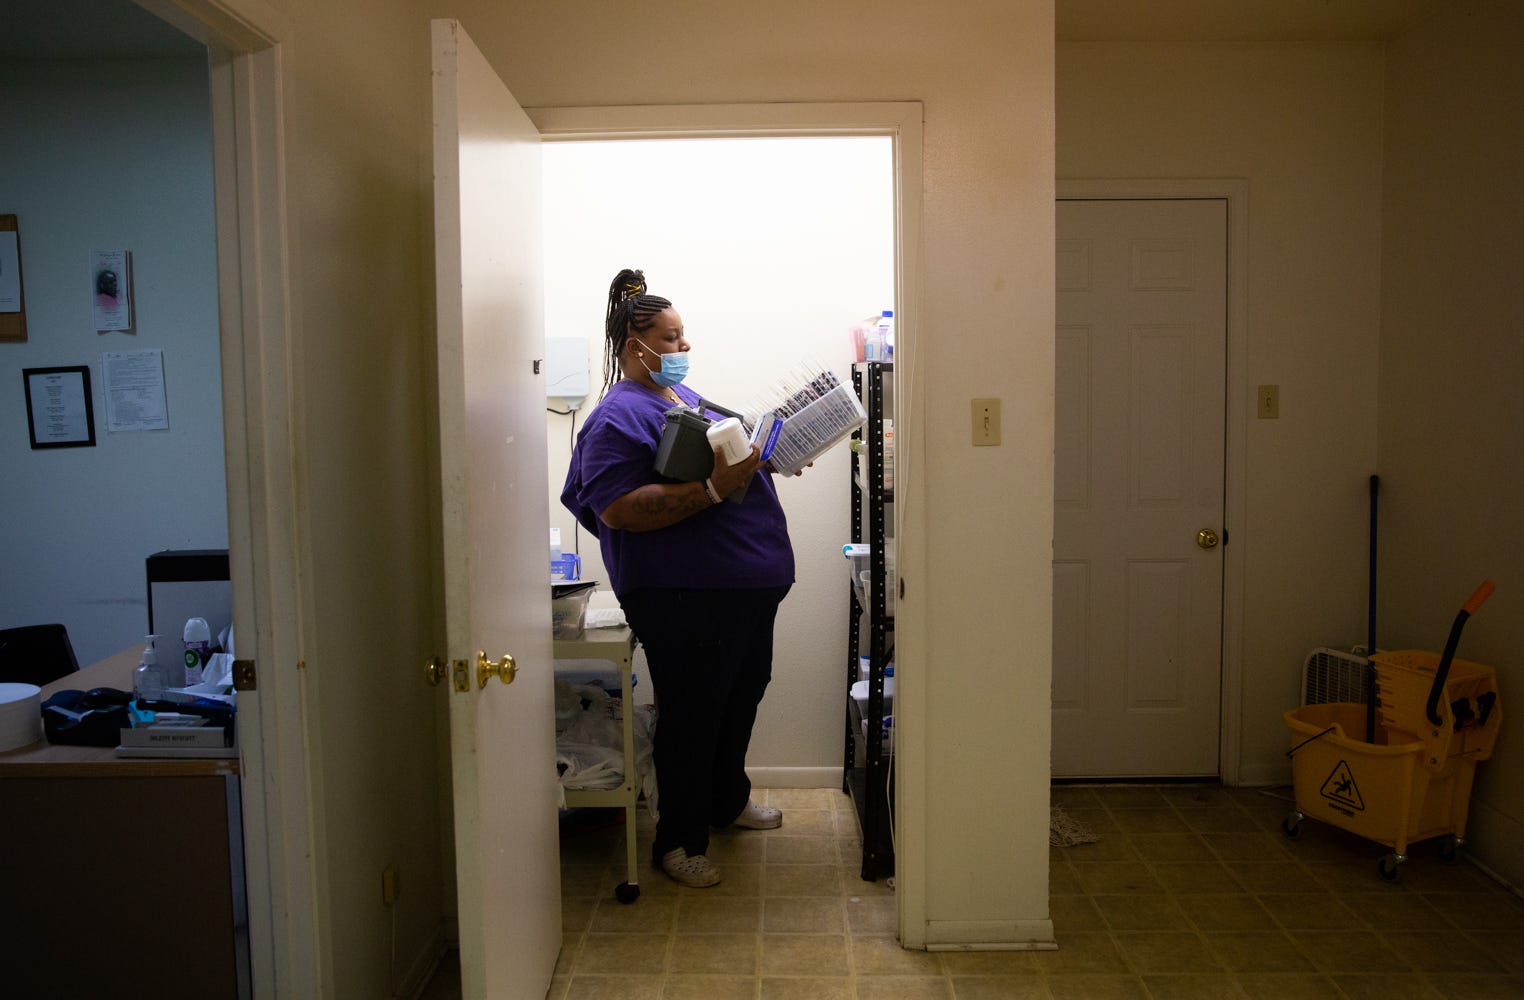 Tre'Asia Anderson gets her clients' medication out of hte locked closet where it is kept; her arms are full. The camera captures her from a doorway.